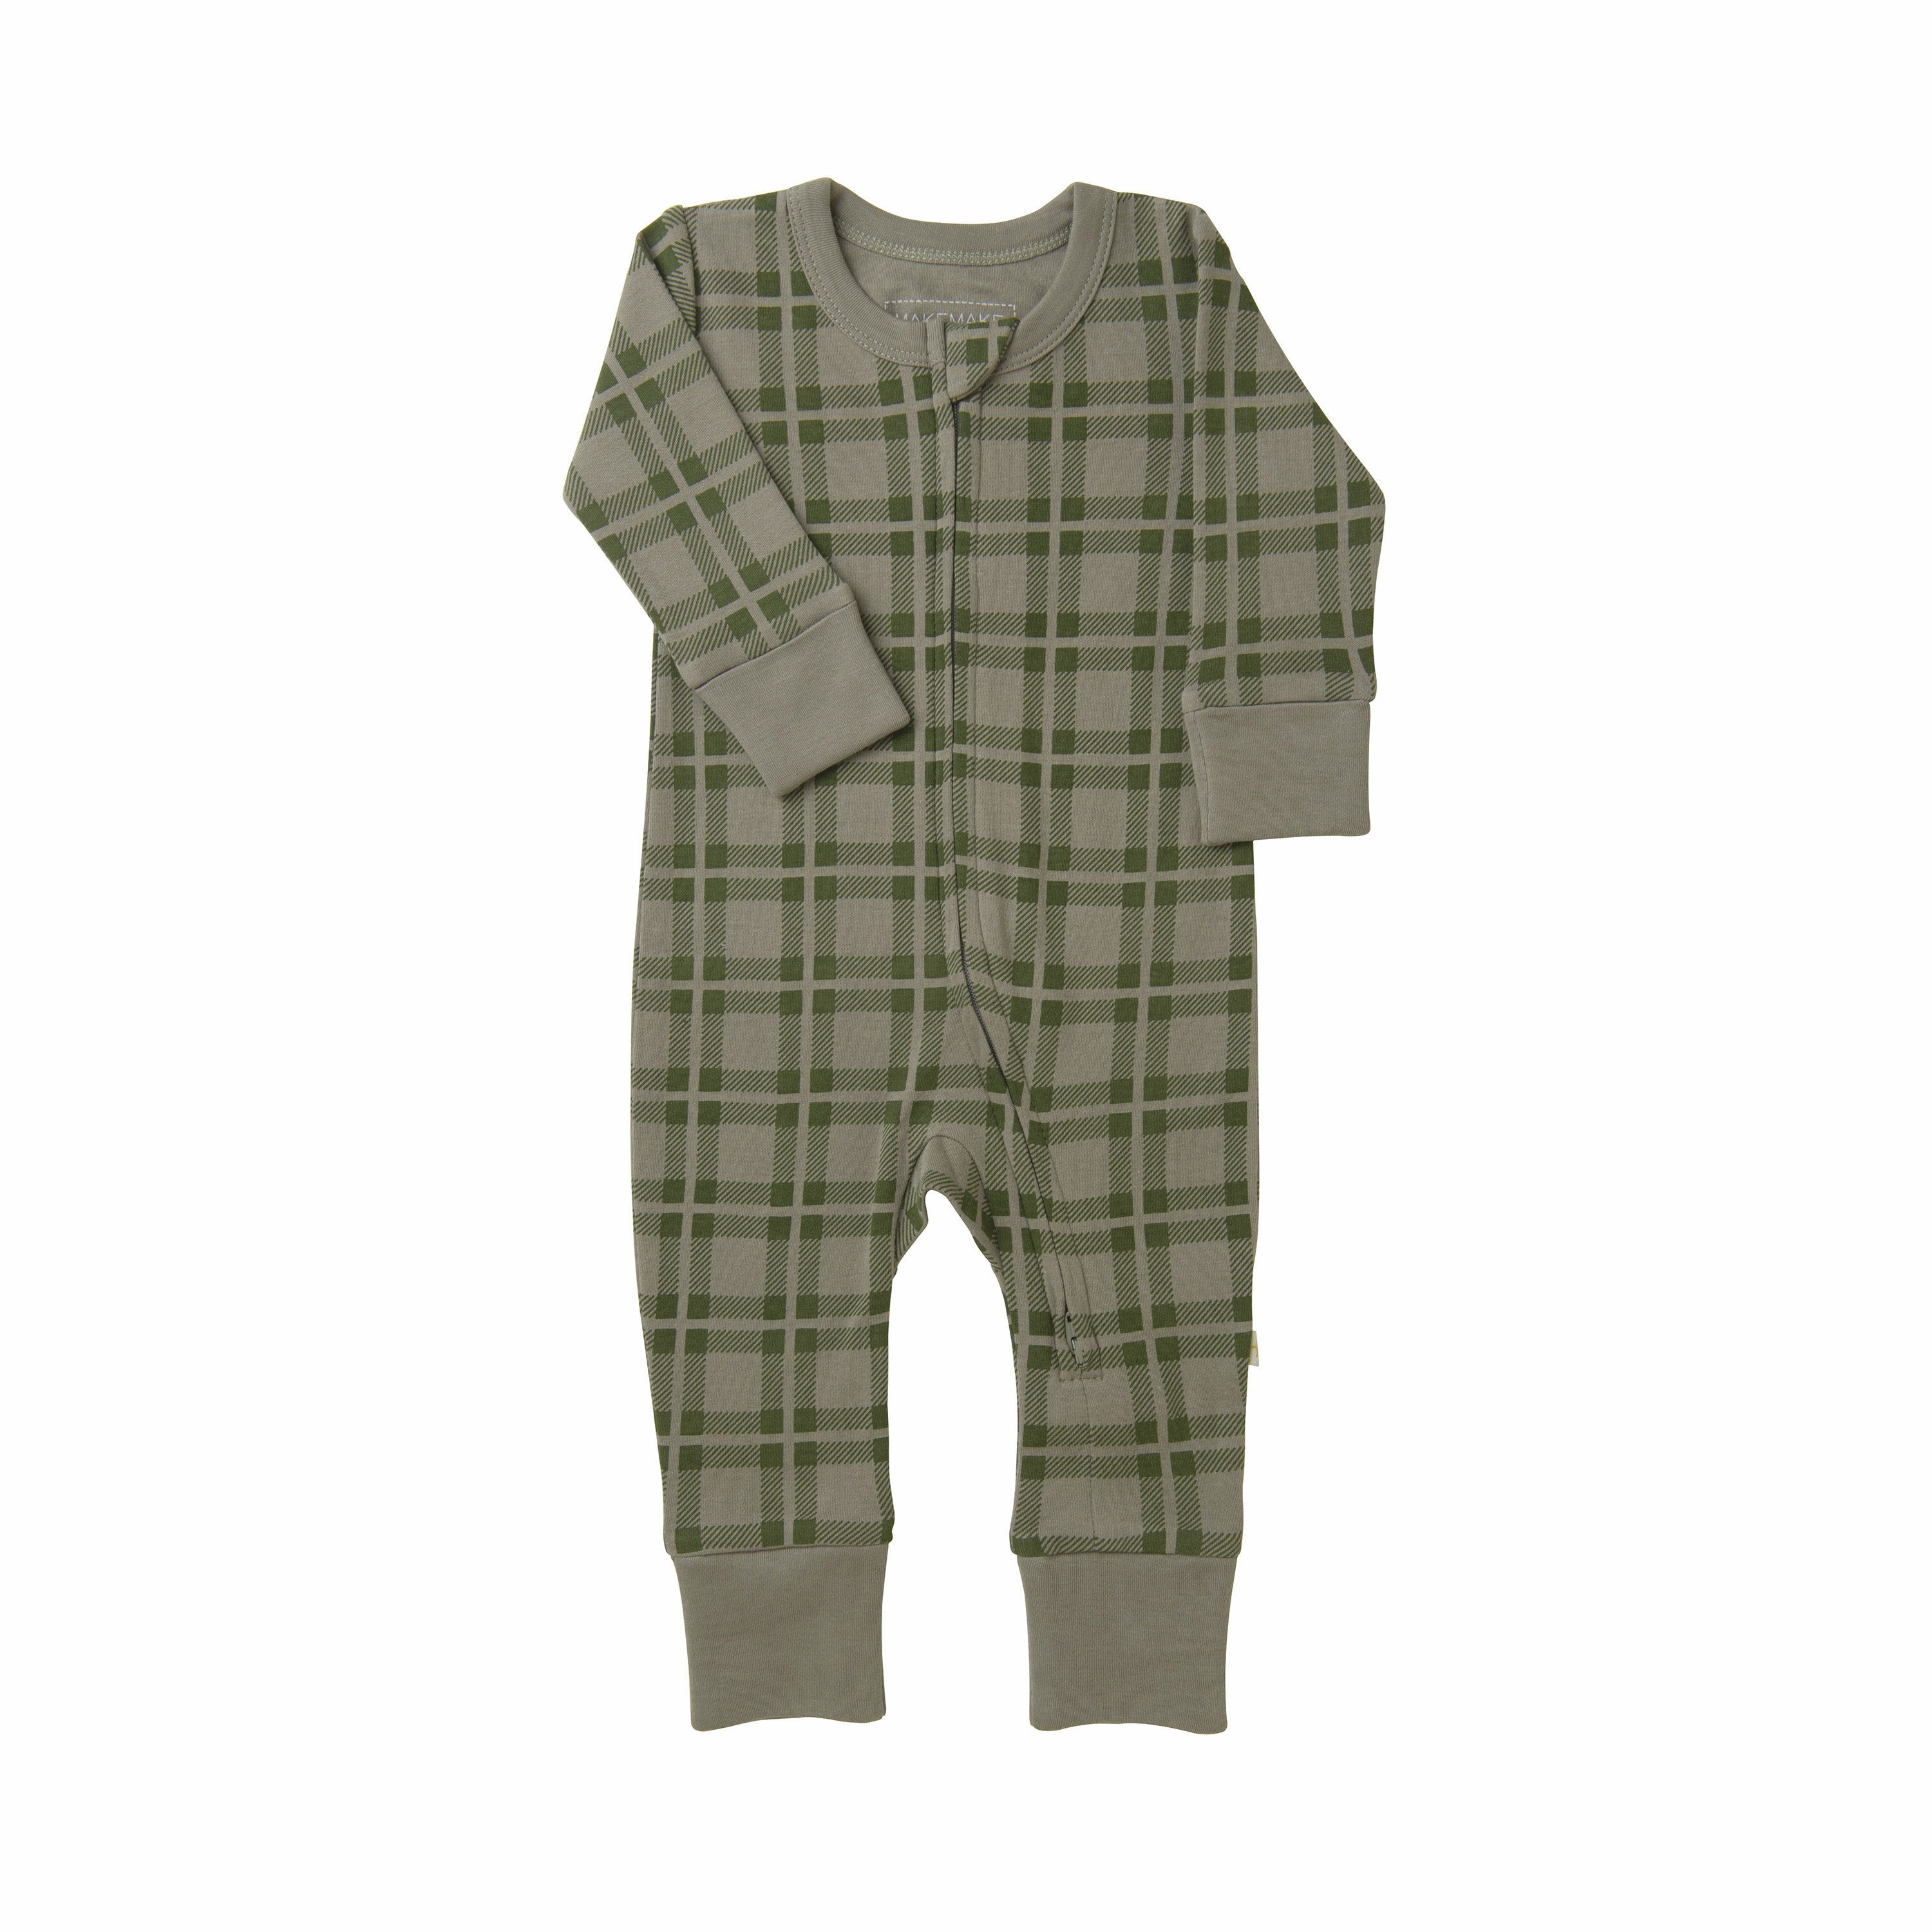 Green and gray plaid Organic 2-Way Zip Romper with long sleeves and pants, displayed against a white background by Organic Baby.